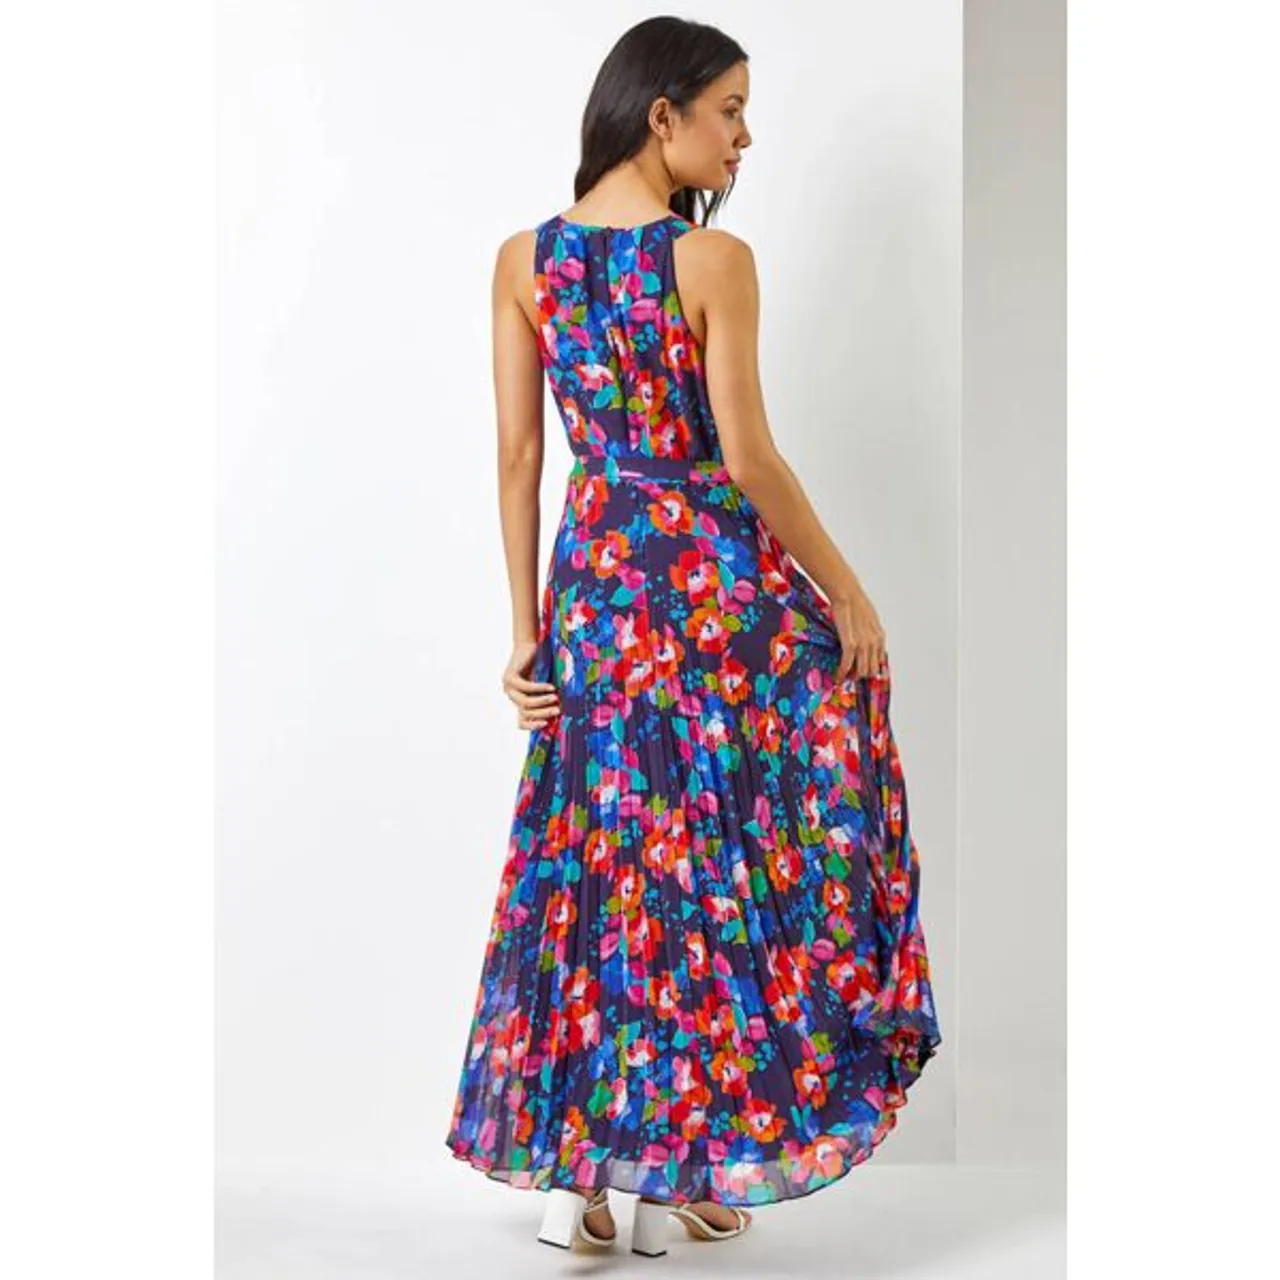 Roman Floral Print Pleated Maxi Dress in Navy 16 female